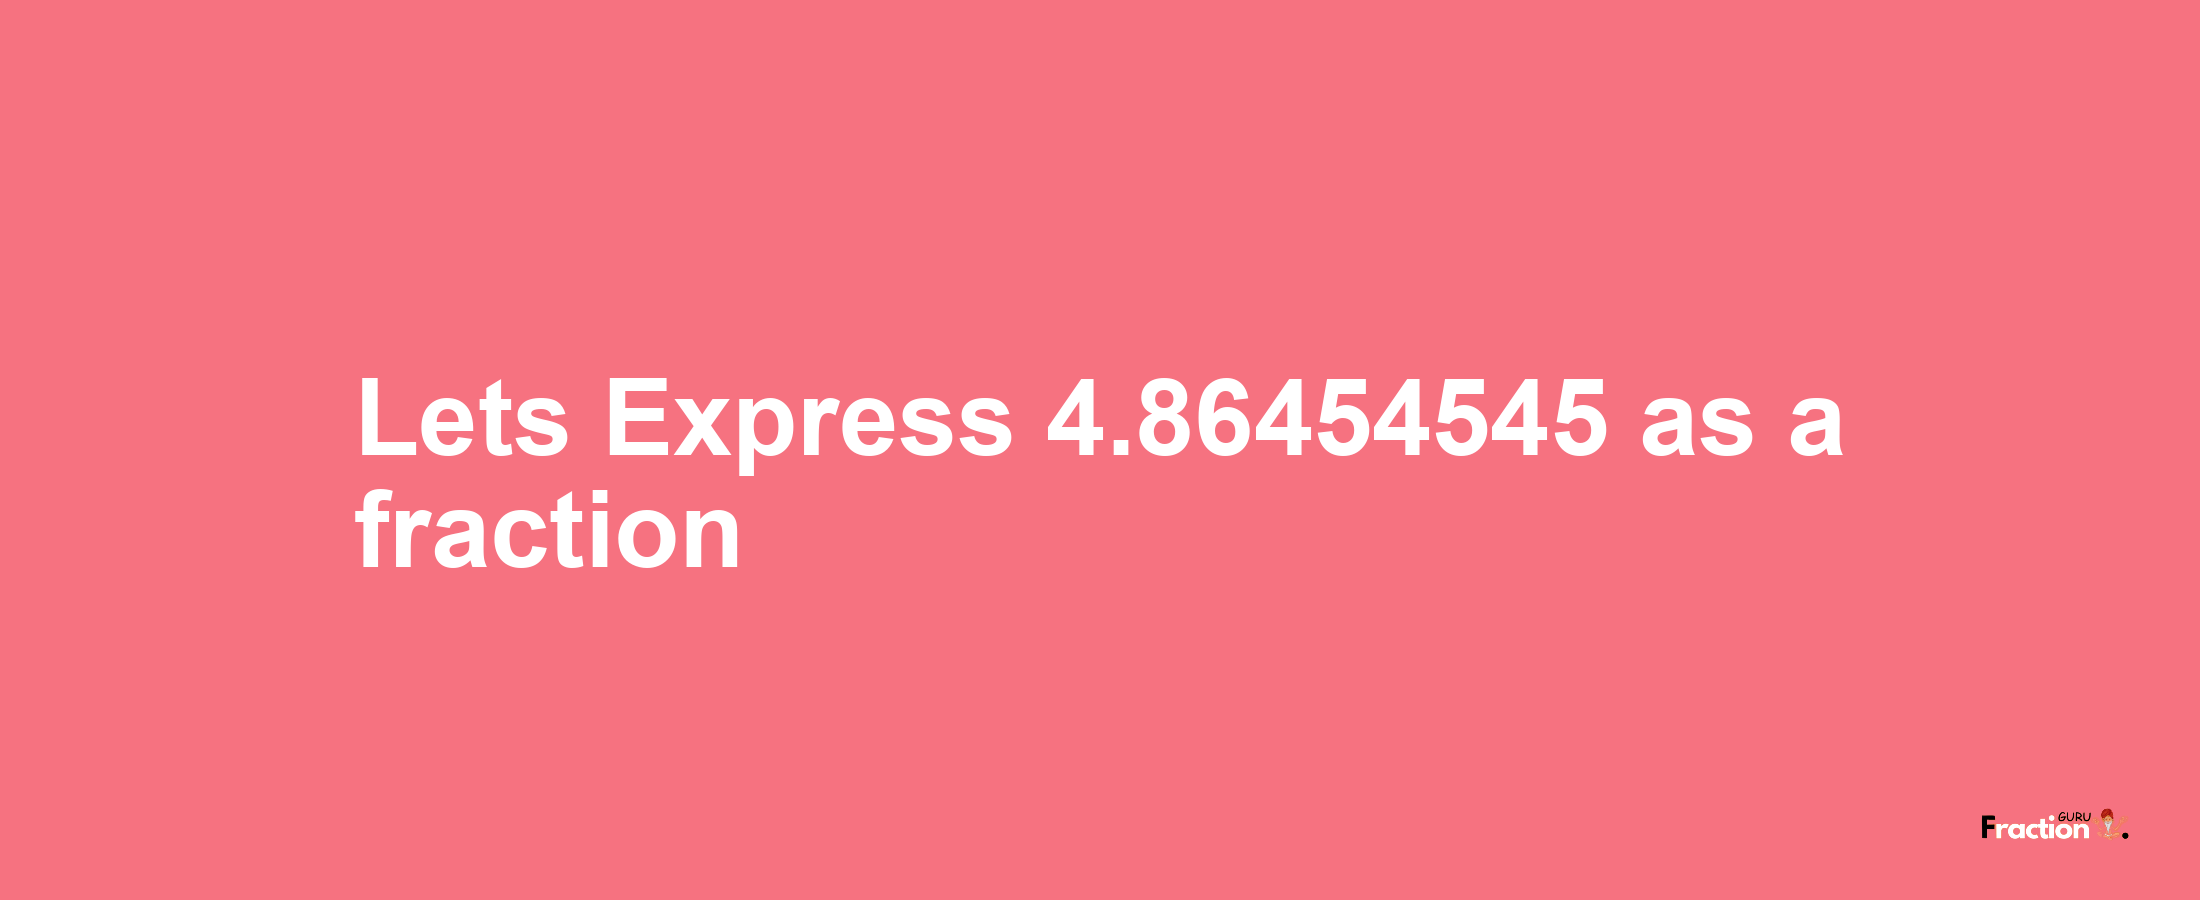 Lets Express 4.86454545 as afraction